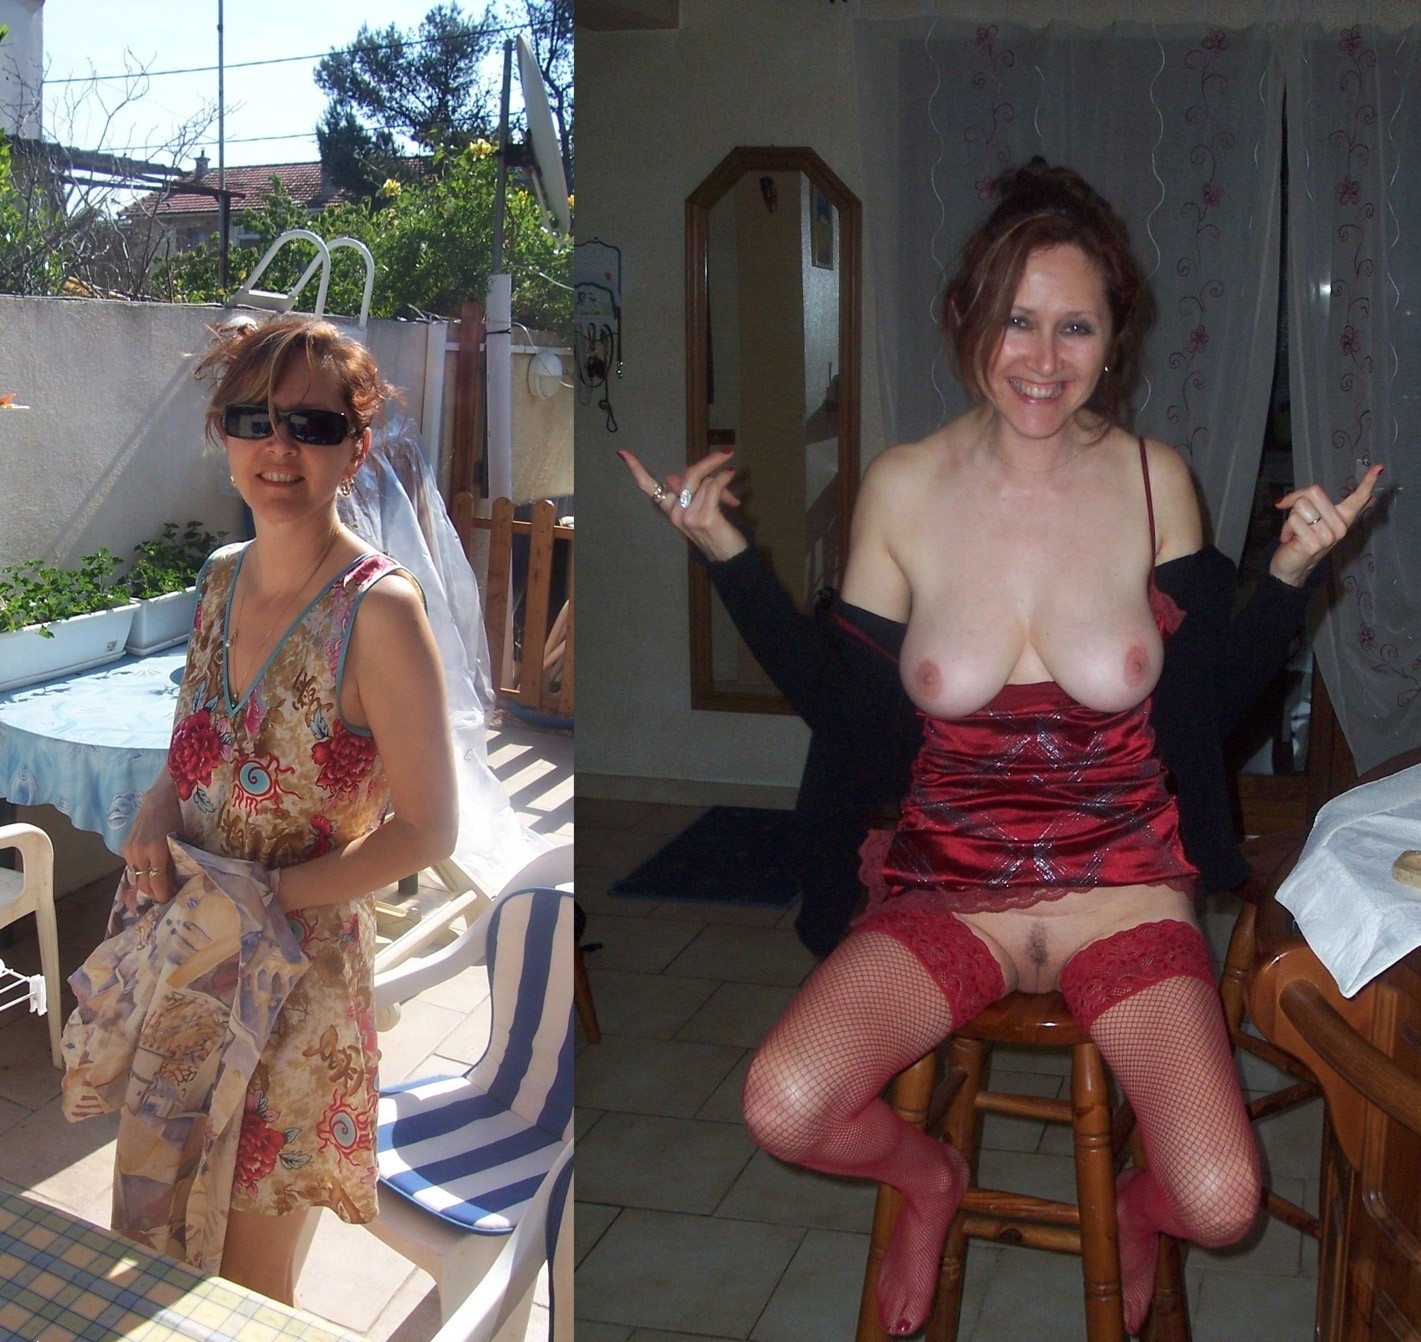 of age women dressed vs undressed truth or dare pics